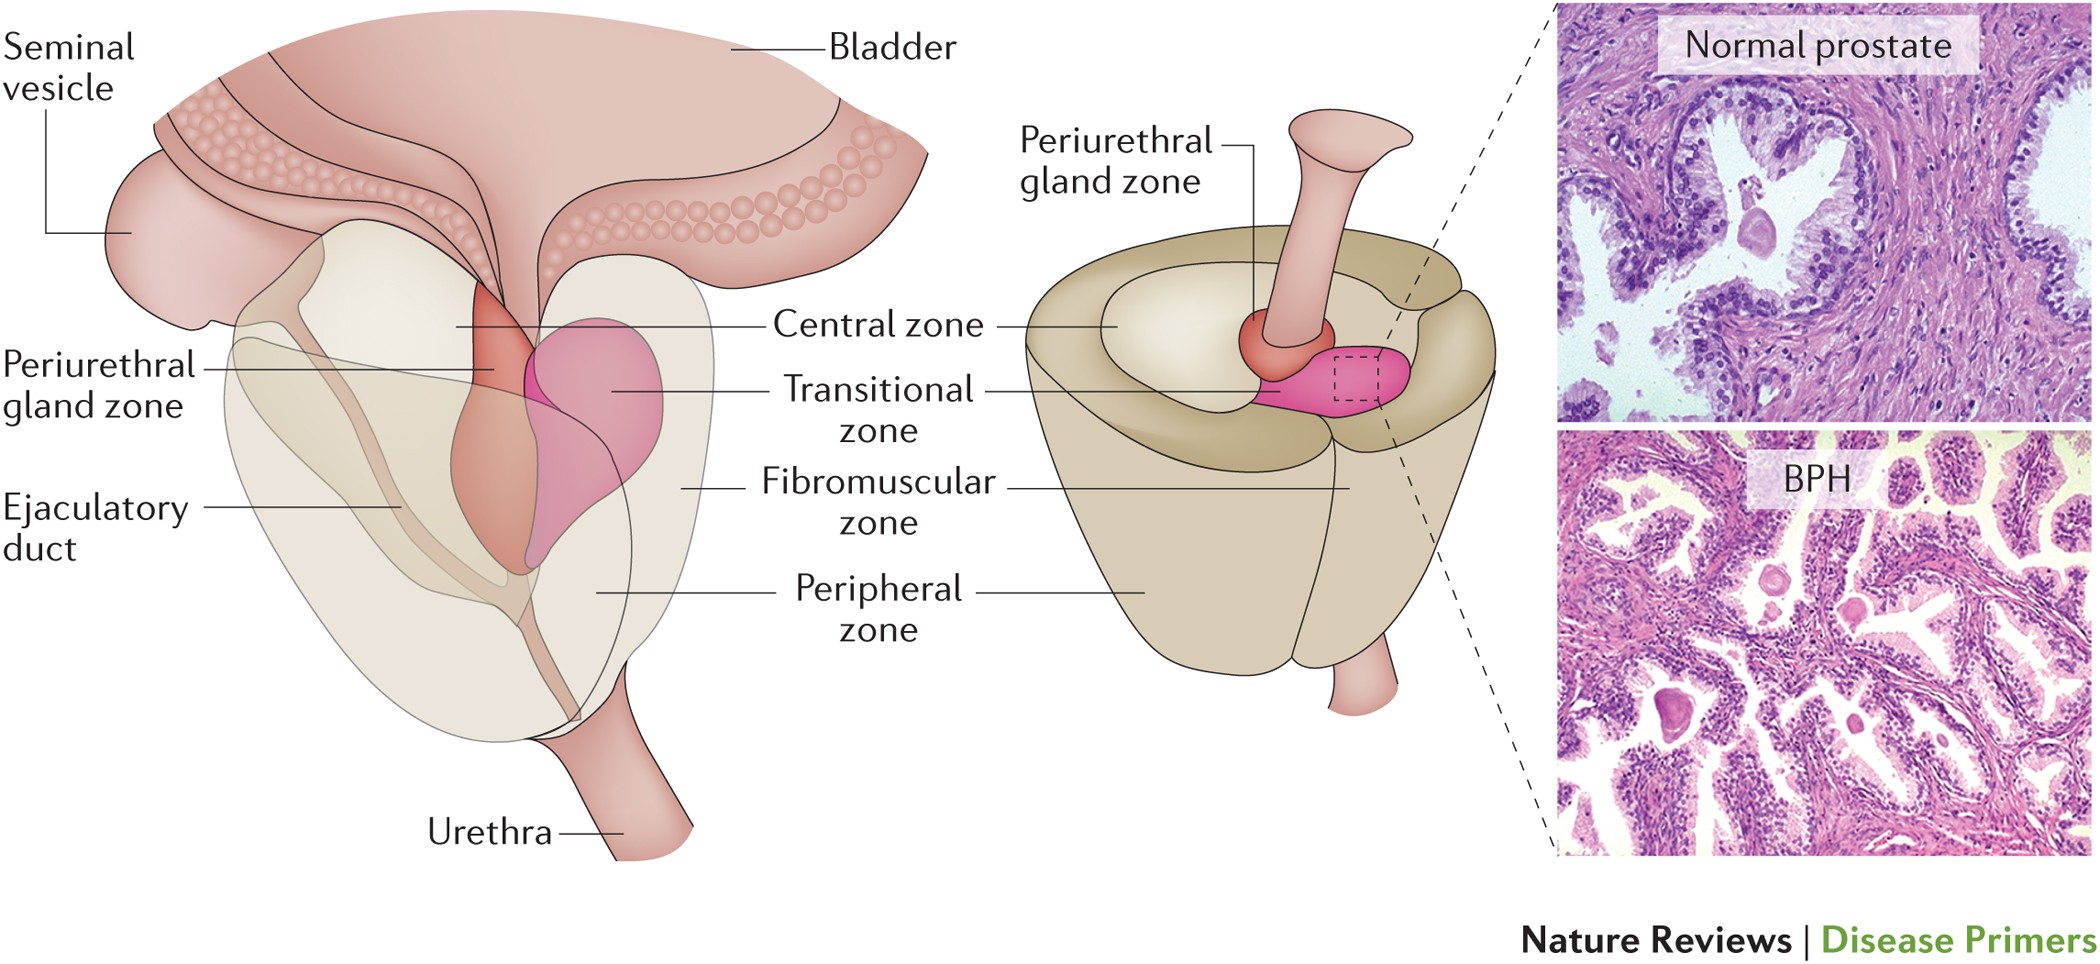 benign prostatic hyperplasia (bph) is characterized by)